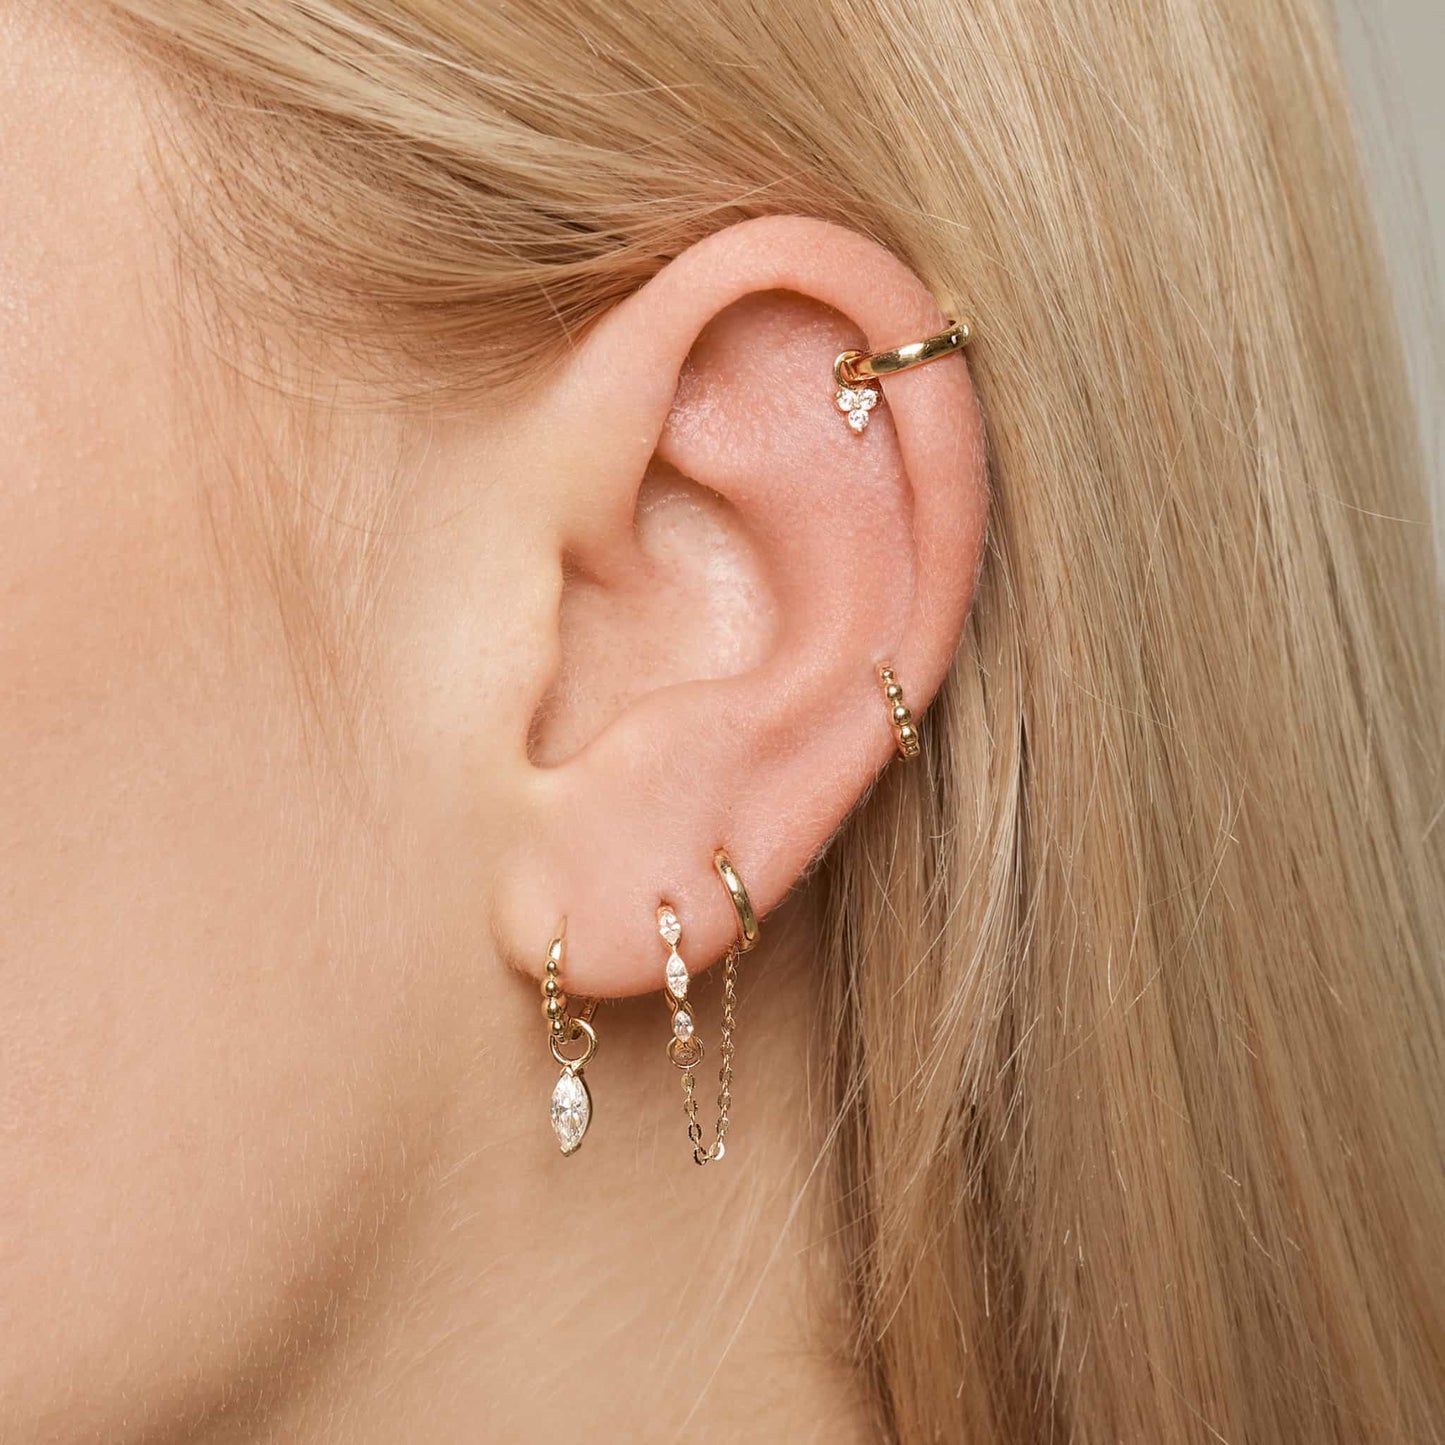 Ear with the Charms for Huggie Earrings